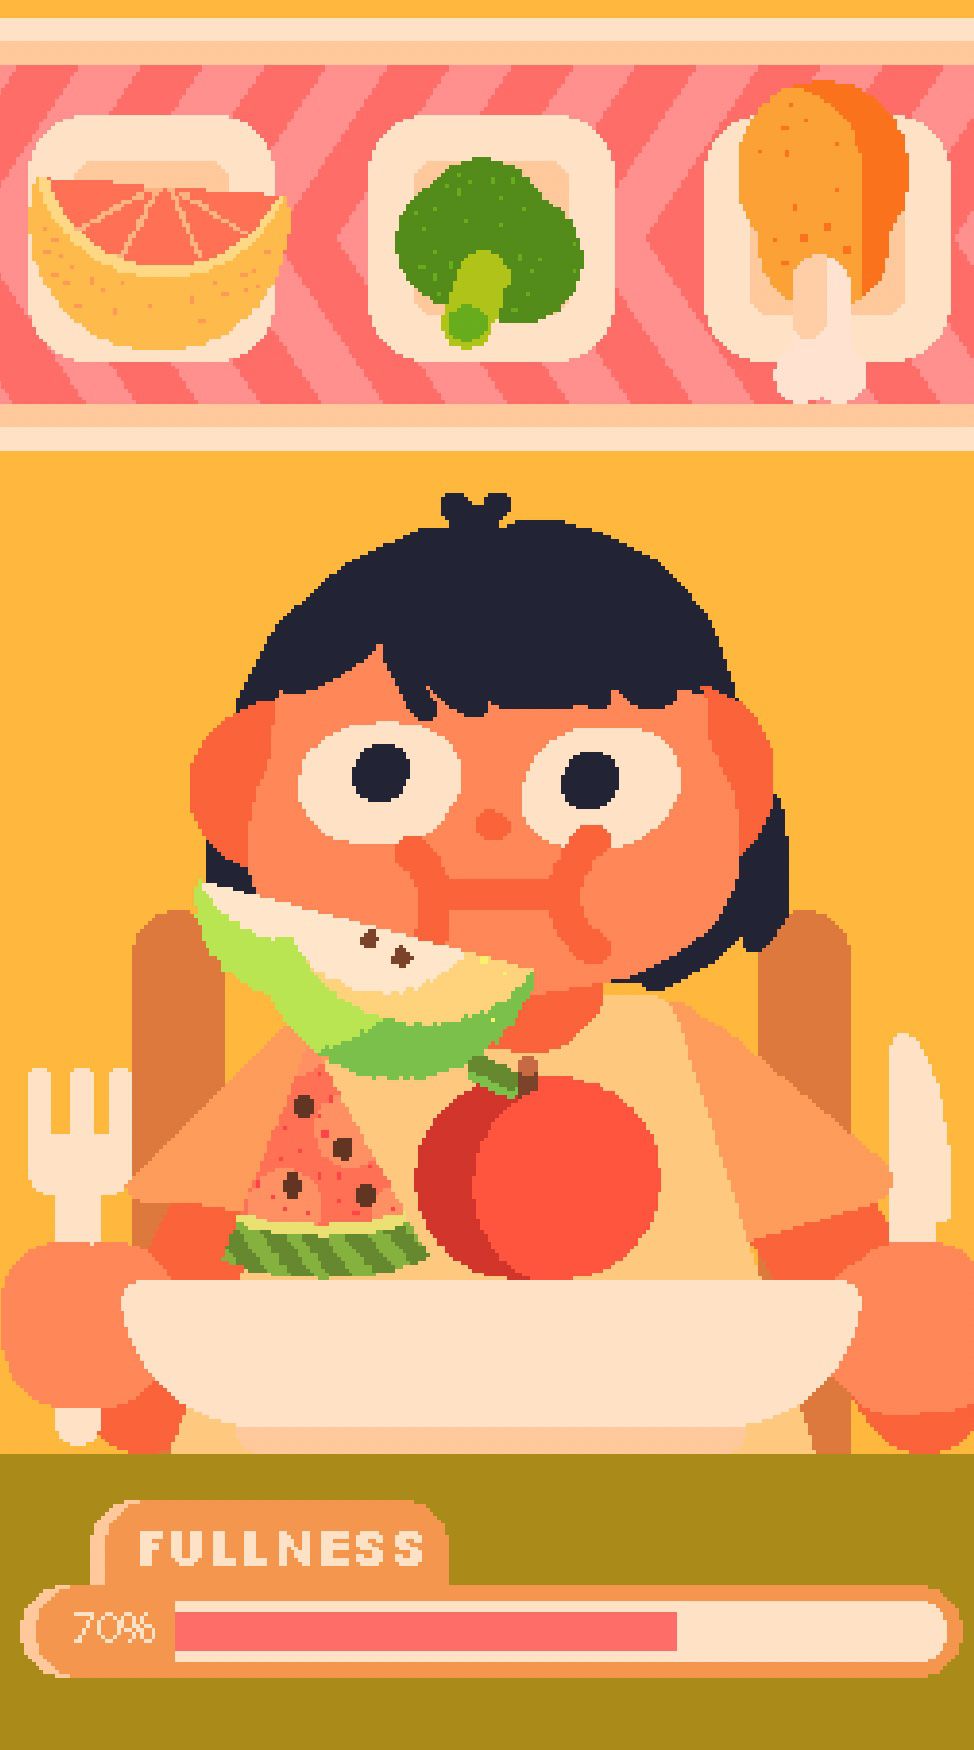 A cartoony character eats food with a meter for fullness below them